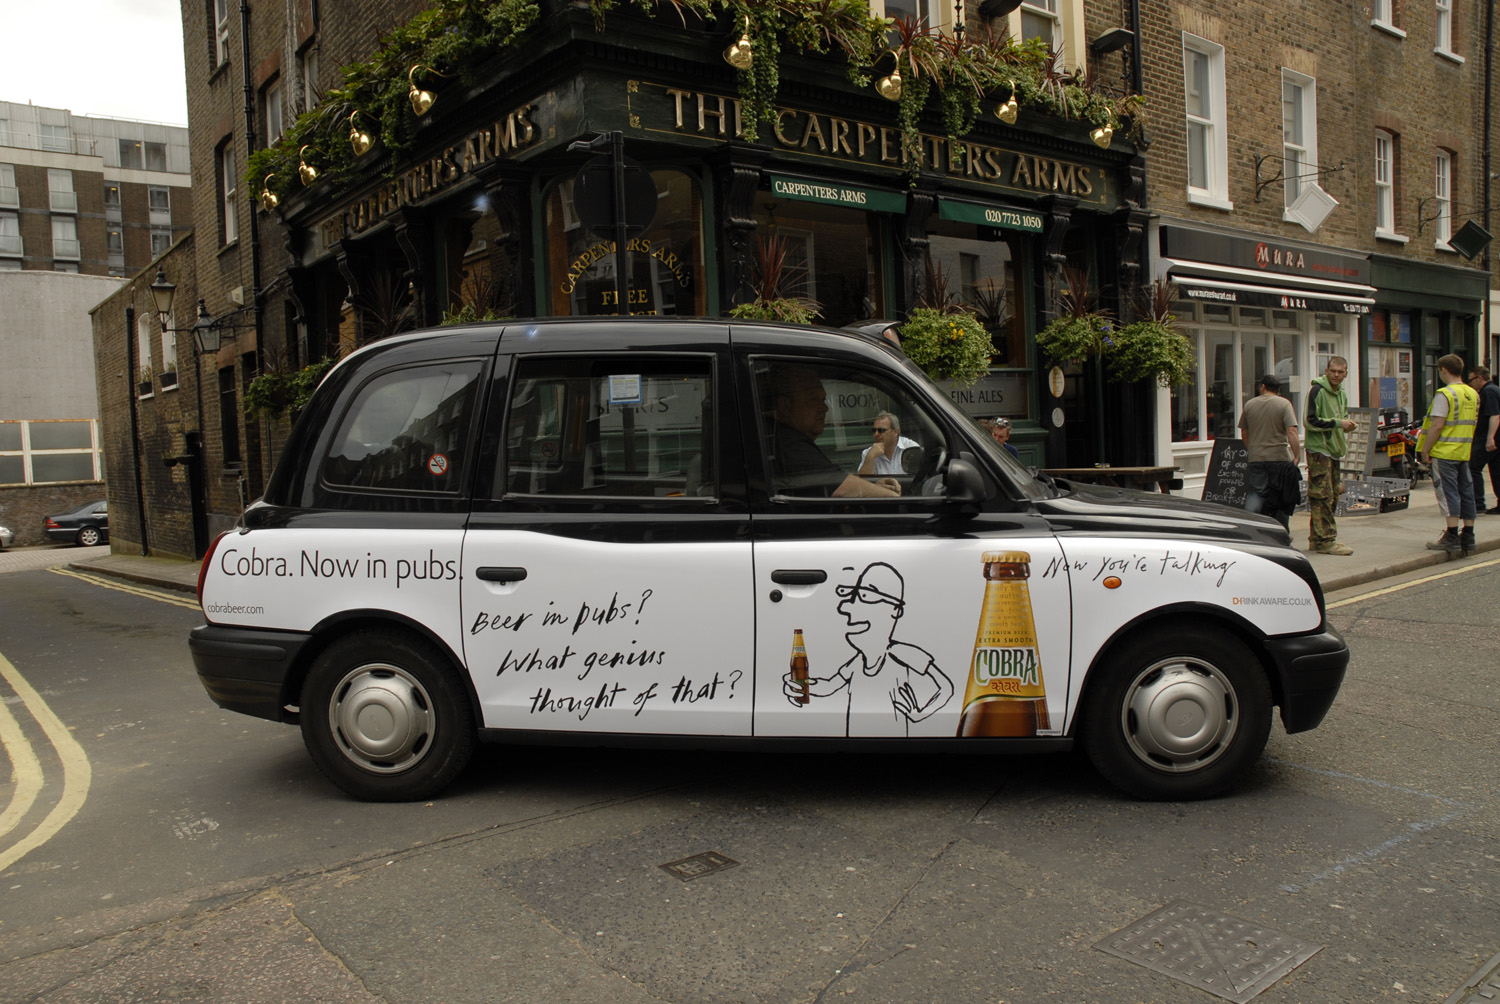 2008 Ubiquitous taxi advertising campaign for Cobra Beer - Now you're talking